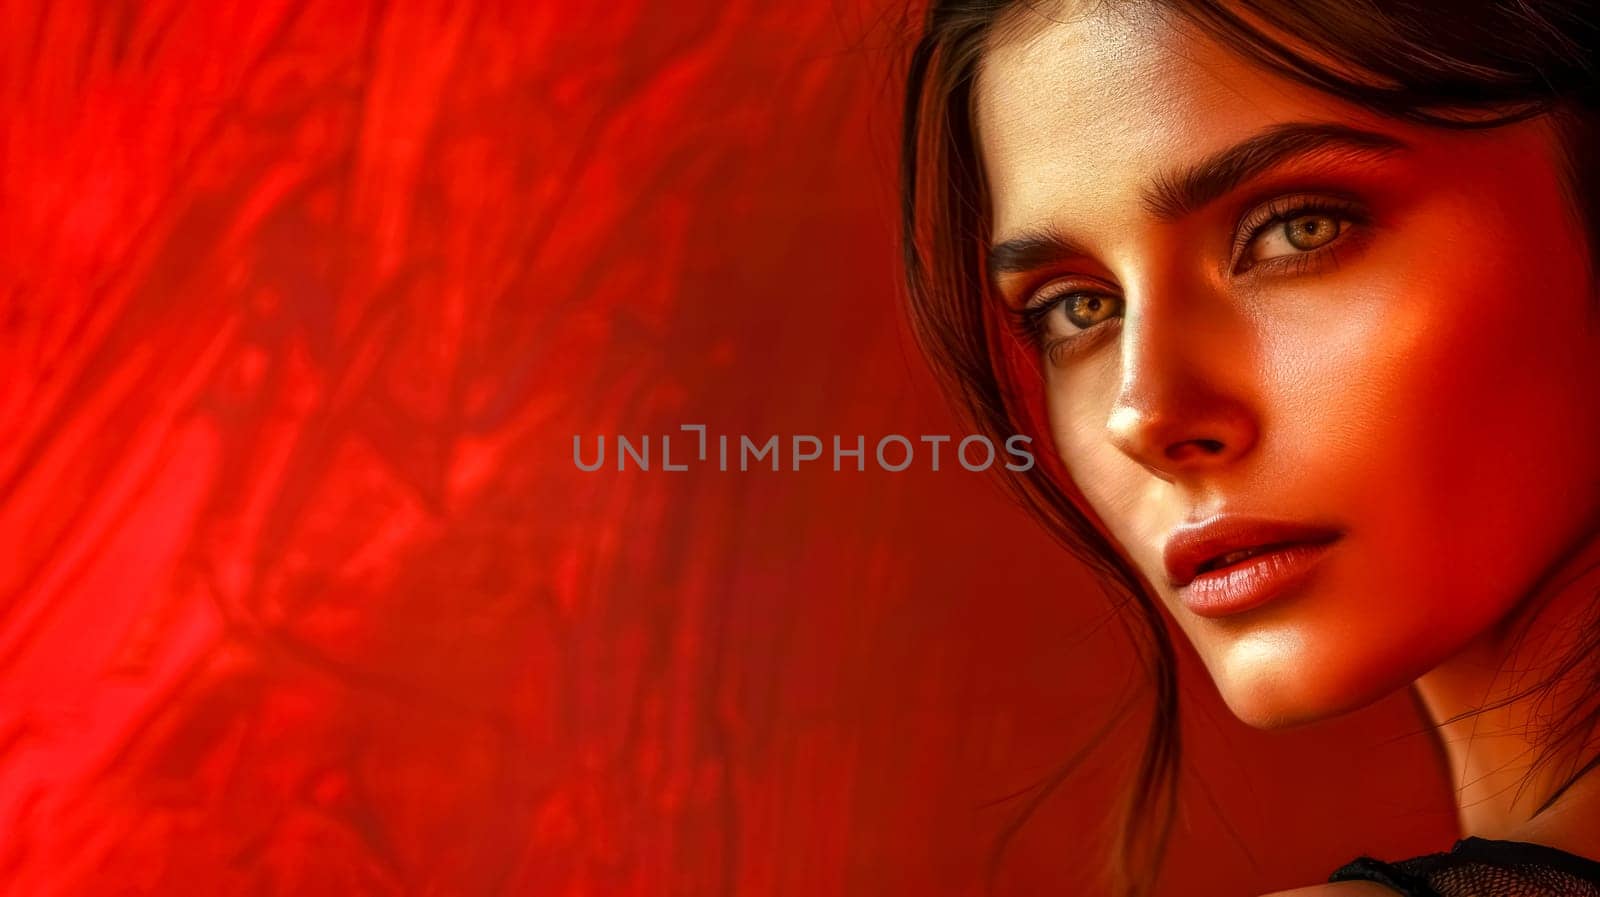 Mysterious beauty: woman with intense gaze, copy space by Edophoto